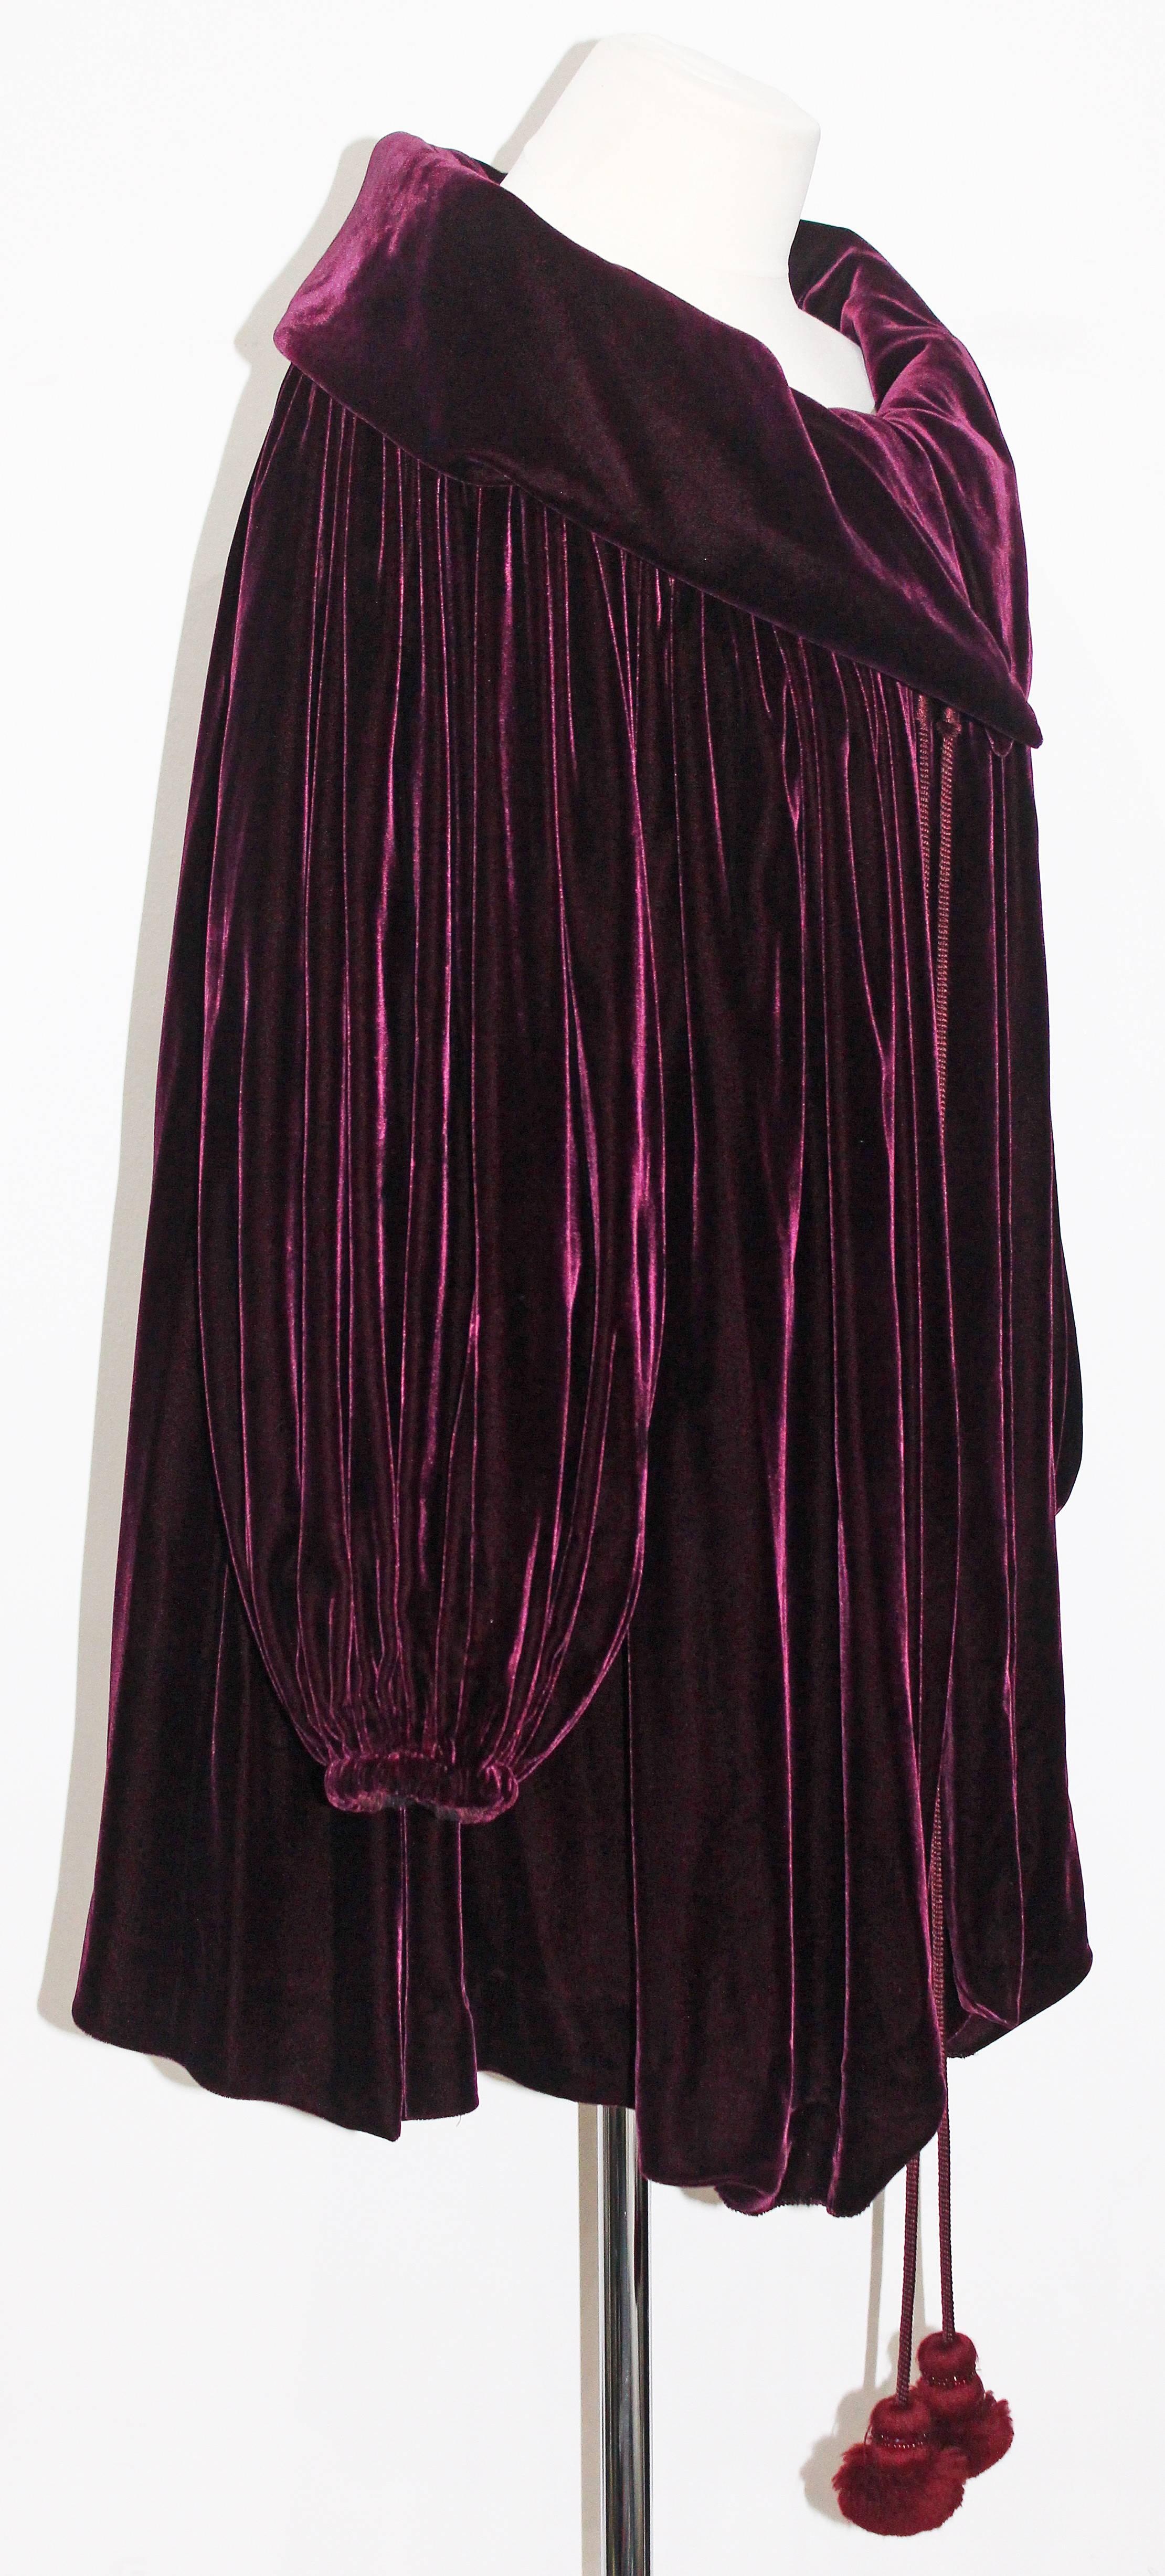 An exceptional silk velvet opera coat by Gianfranco Ferré for Christian Dior designed in the early 1990s. The coat has long beaded rope tassels.

Sizing: No size label but would fit a size Small - Medium

Condition: Excellent, appears rarely